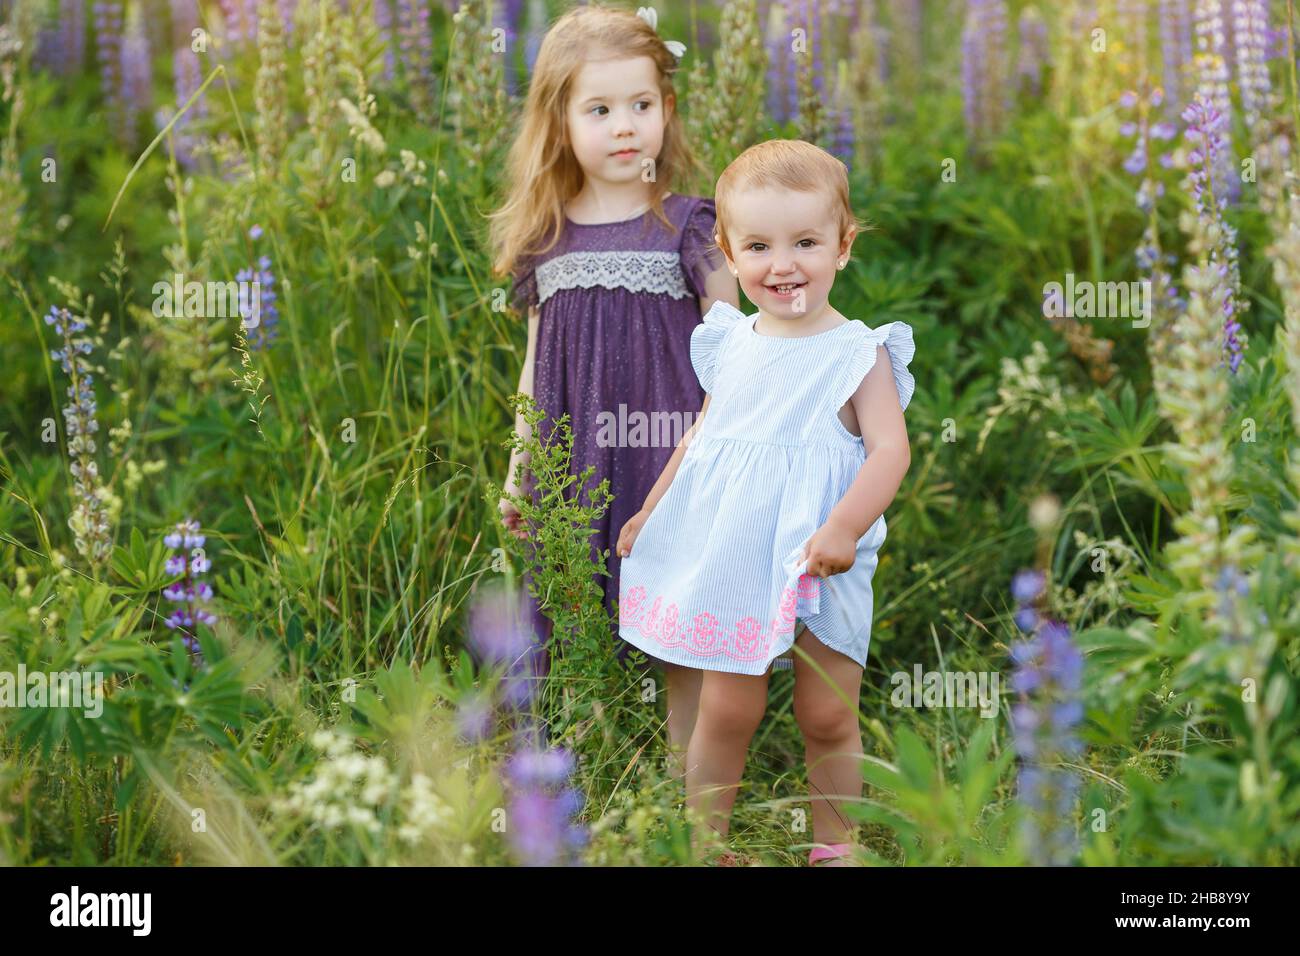 Cute, little girls in dresses walking. Funny smiling children on the field. Kids play outdoor. Concept of happy childhood, friendship and summer leisu Stock Photo